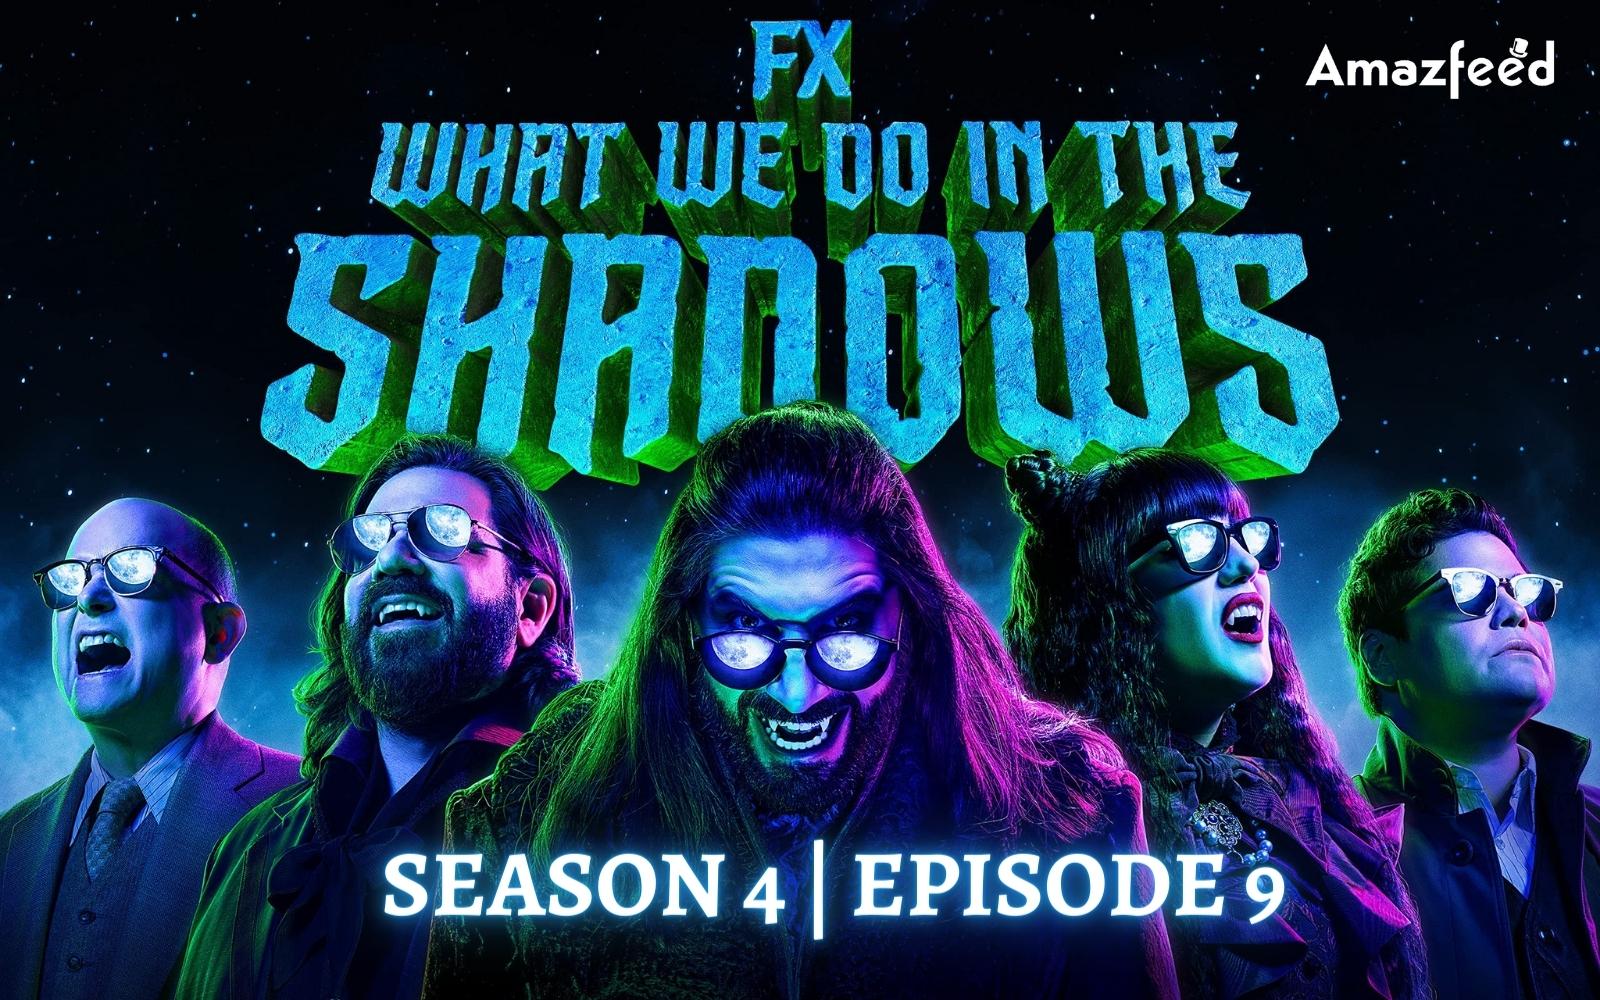 What We Do in the Shadows Season 4 Episode 9 ⇒ Release Date, Recap, Cast, Spoiler, Premiere Time & Cast